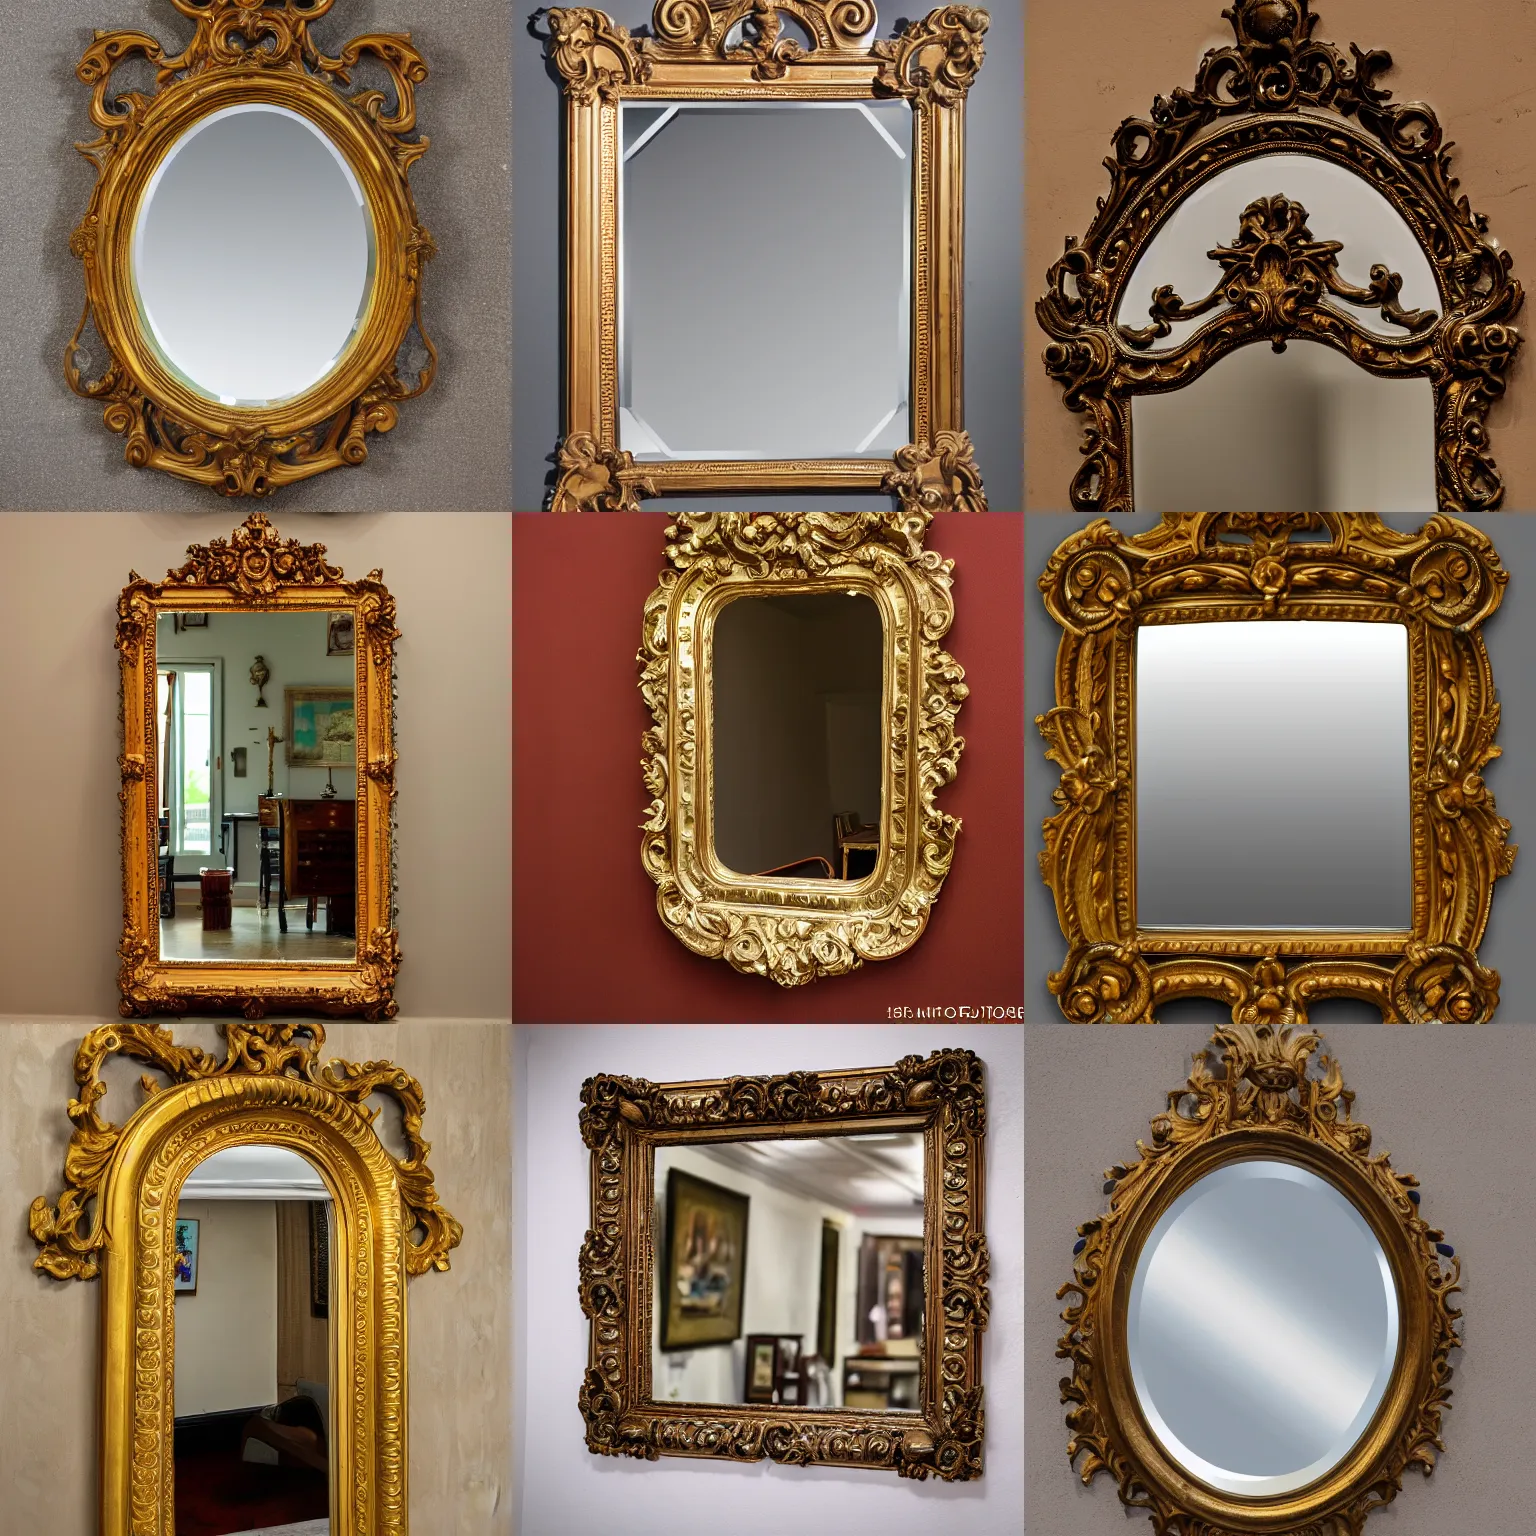 Prompt: professional direct photograph of an ornate mirror